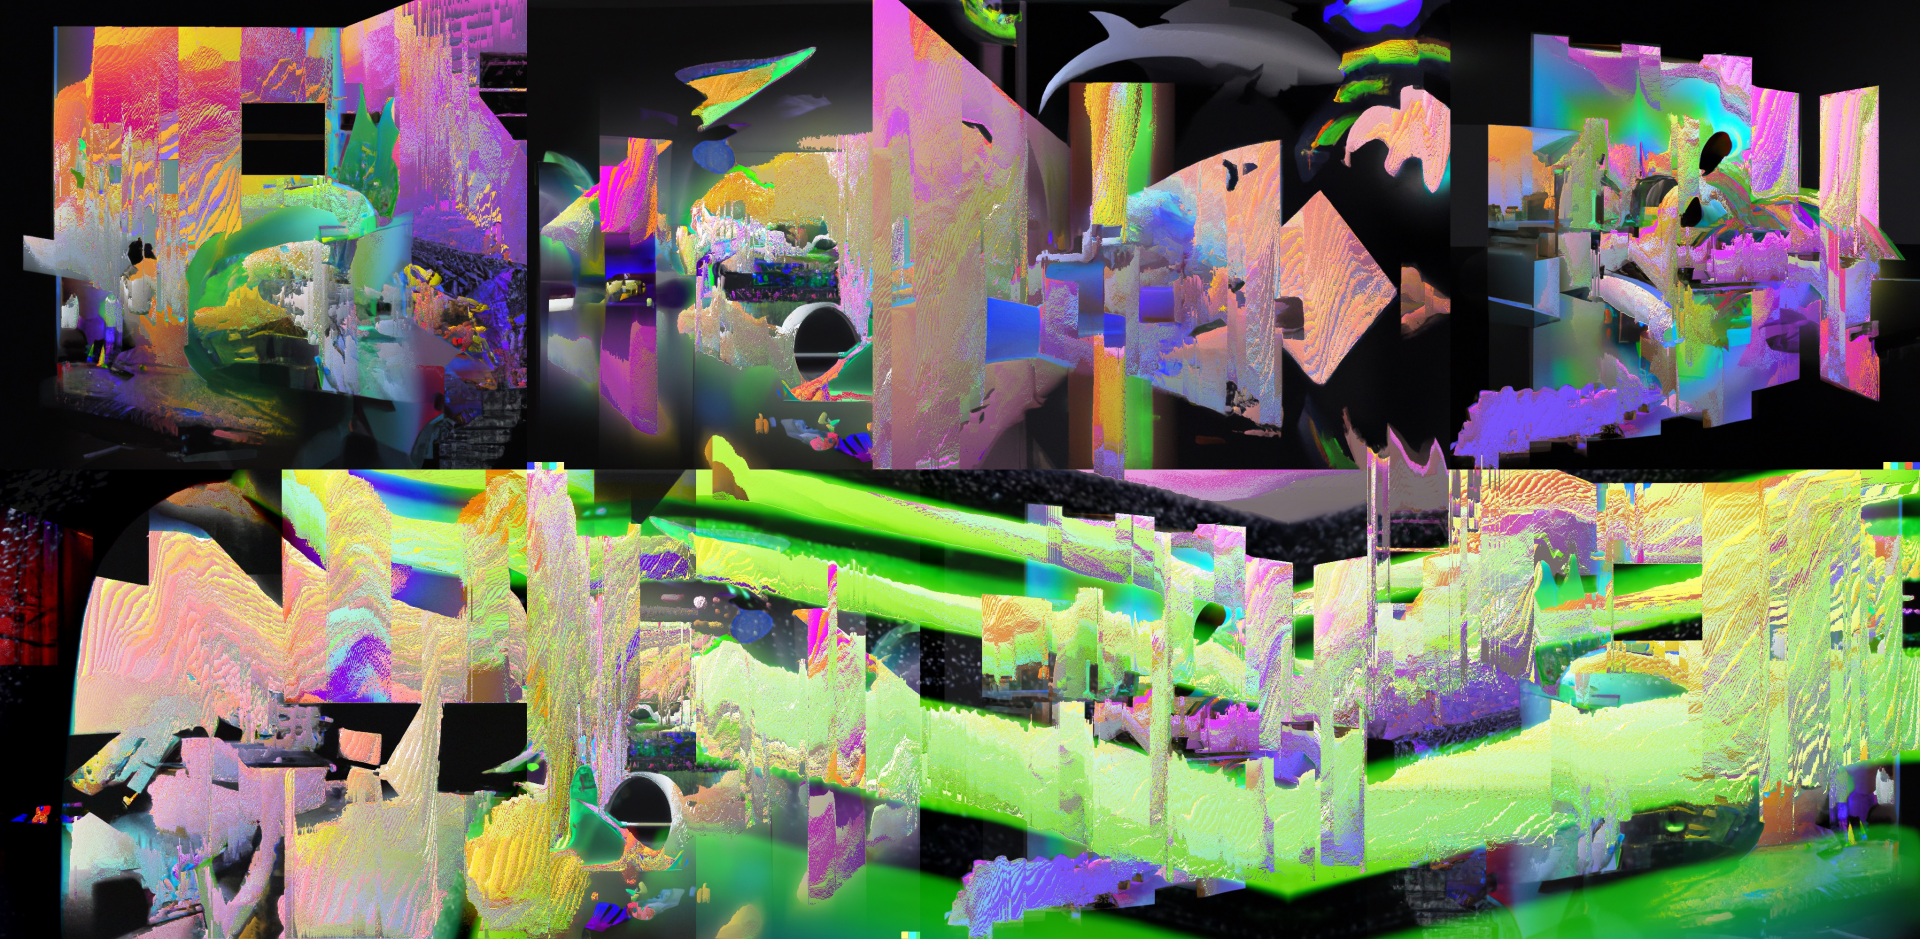 A digital tableau of texture planes and vaguely recognizable images in bright, neon colors against a black background